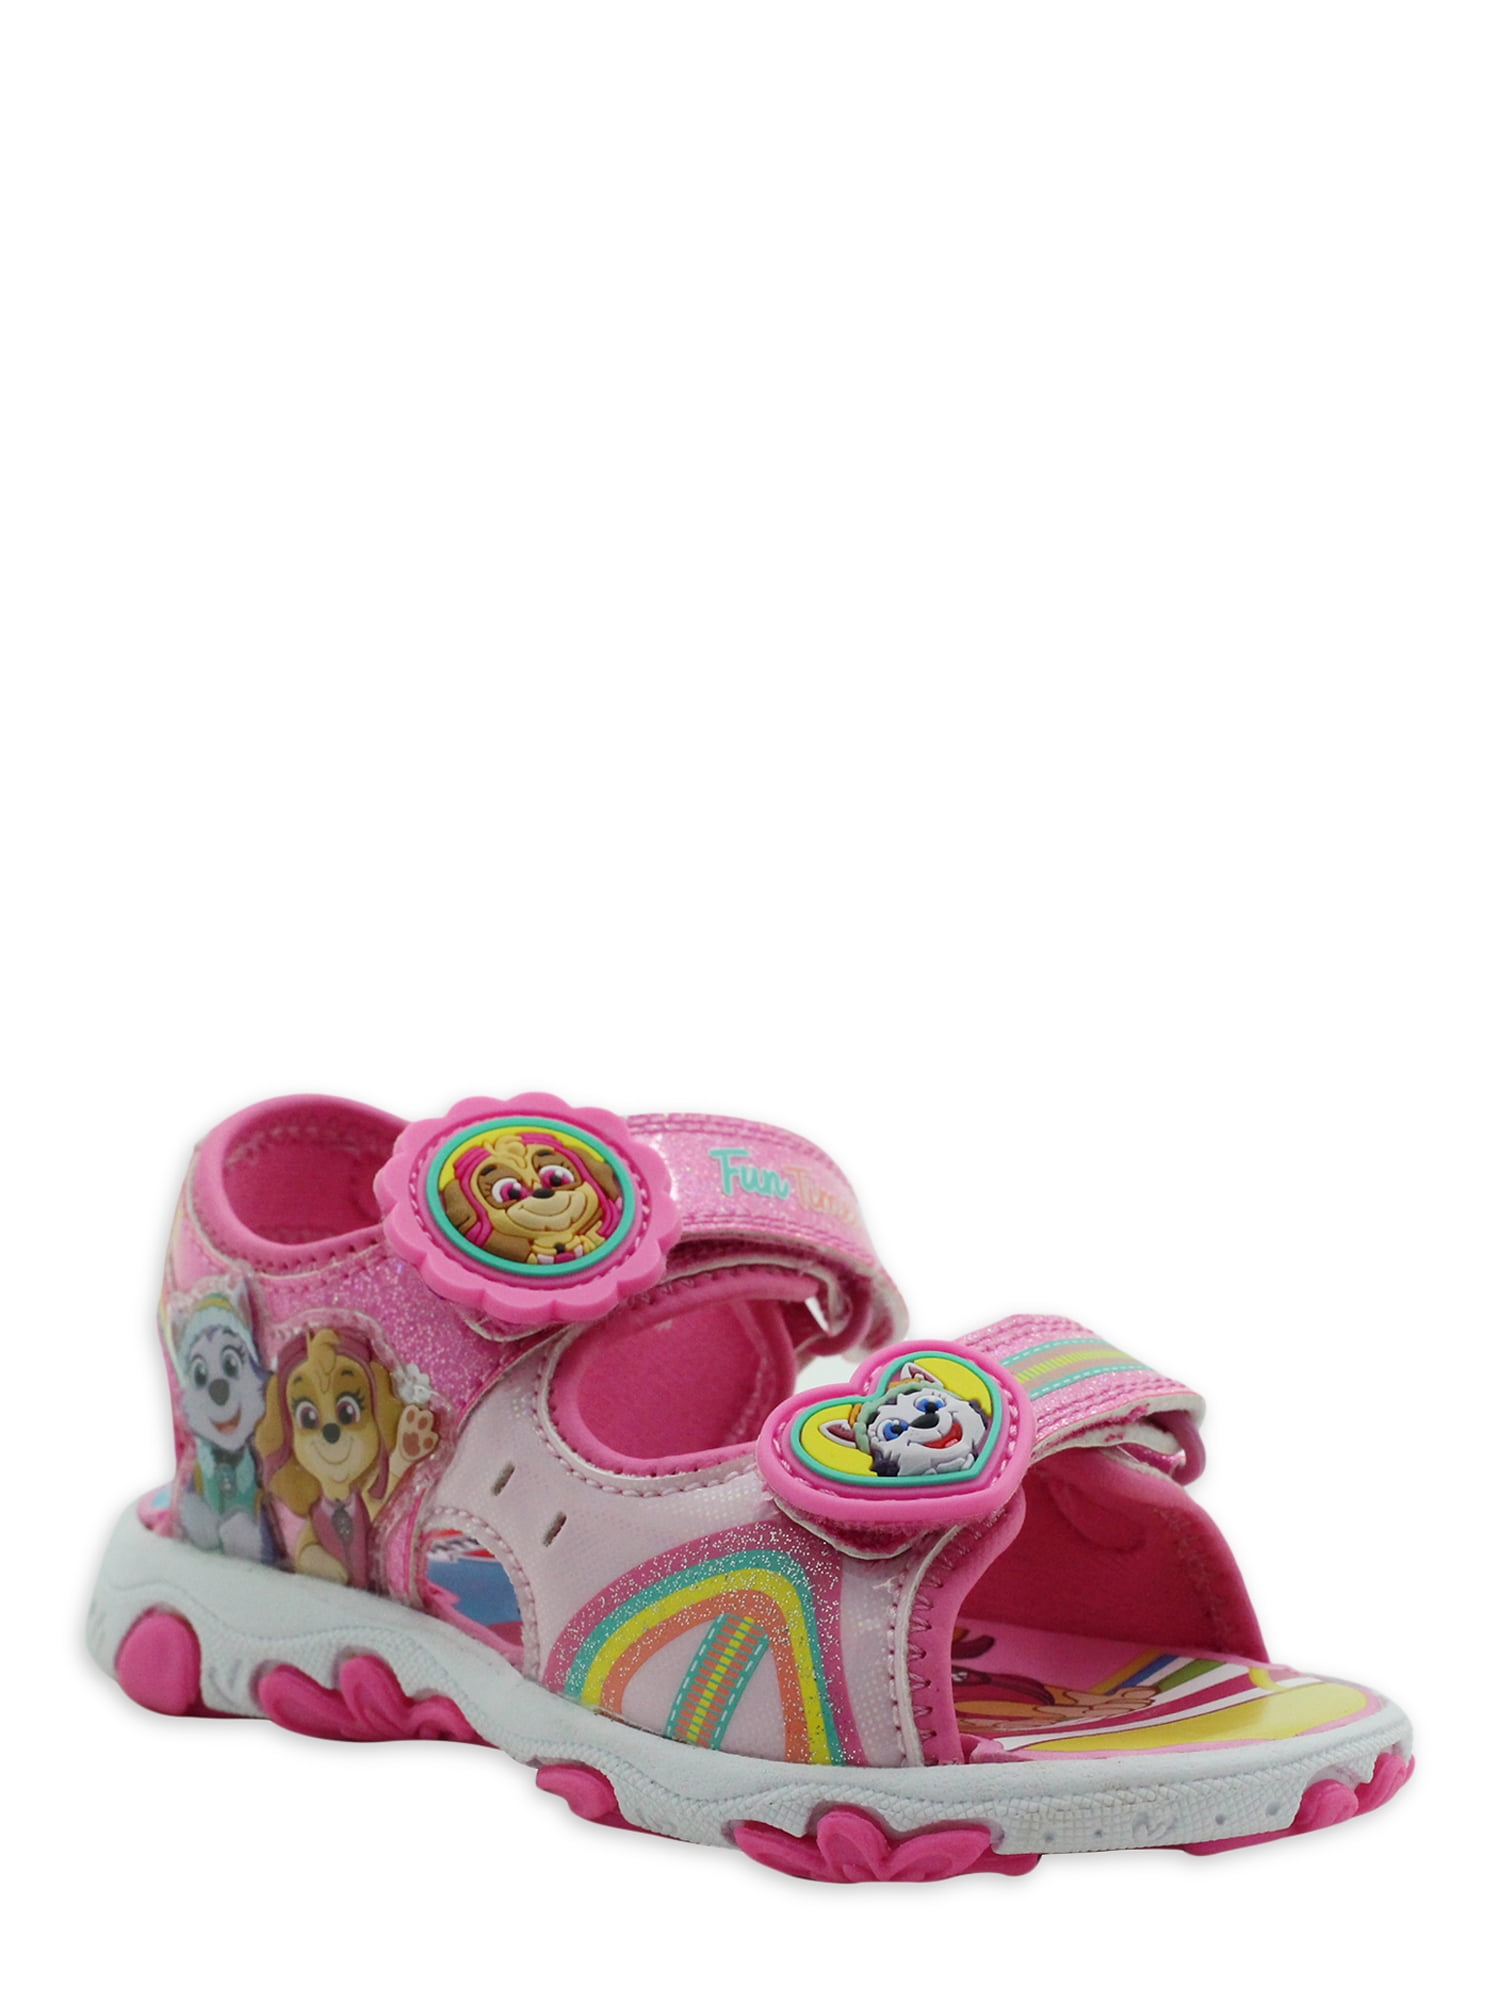 Paw Patrol Skye Open Toe Beach Holiday Summer Adjustable Sandals Various Sizes 